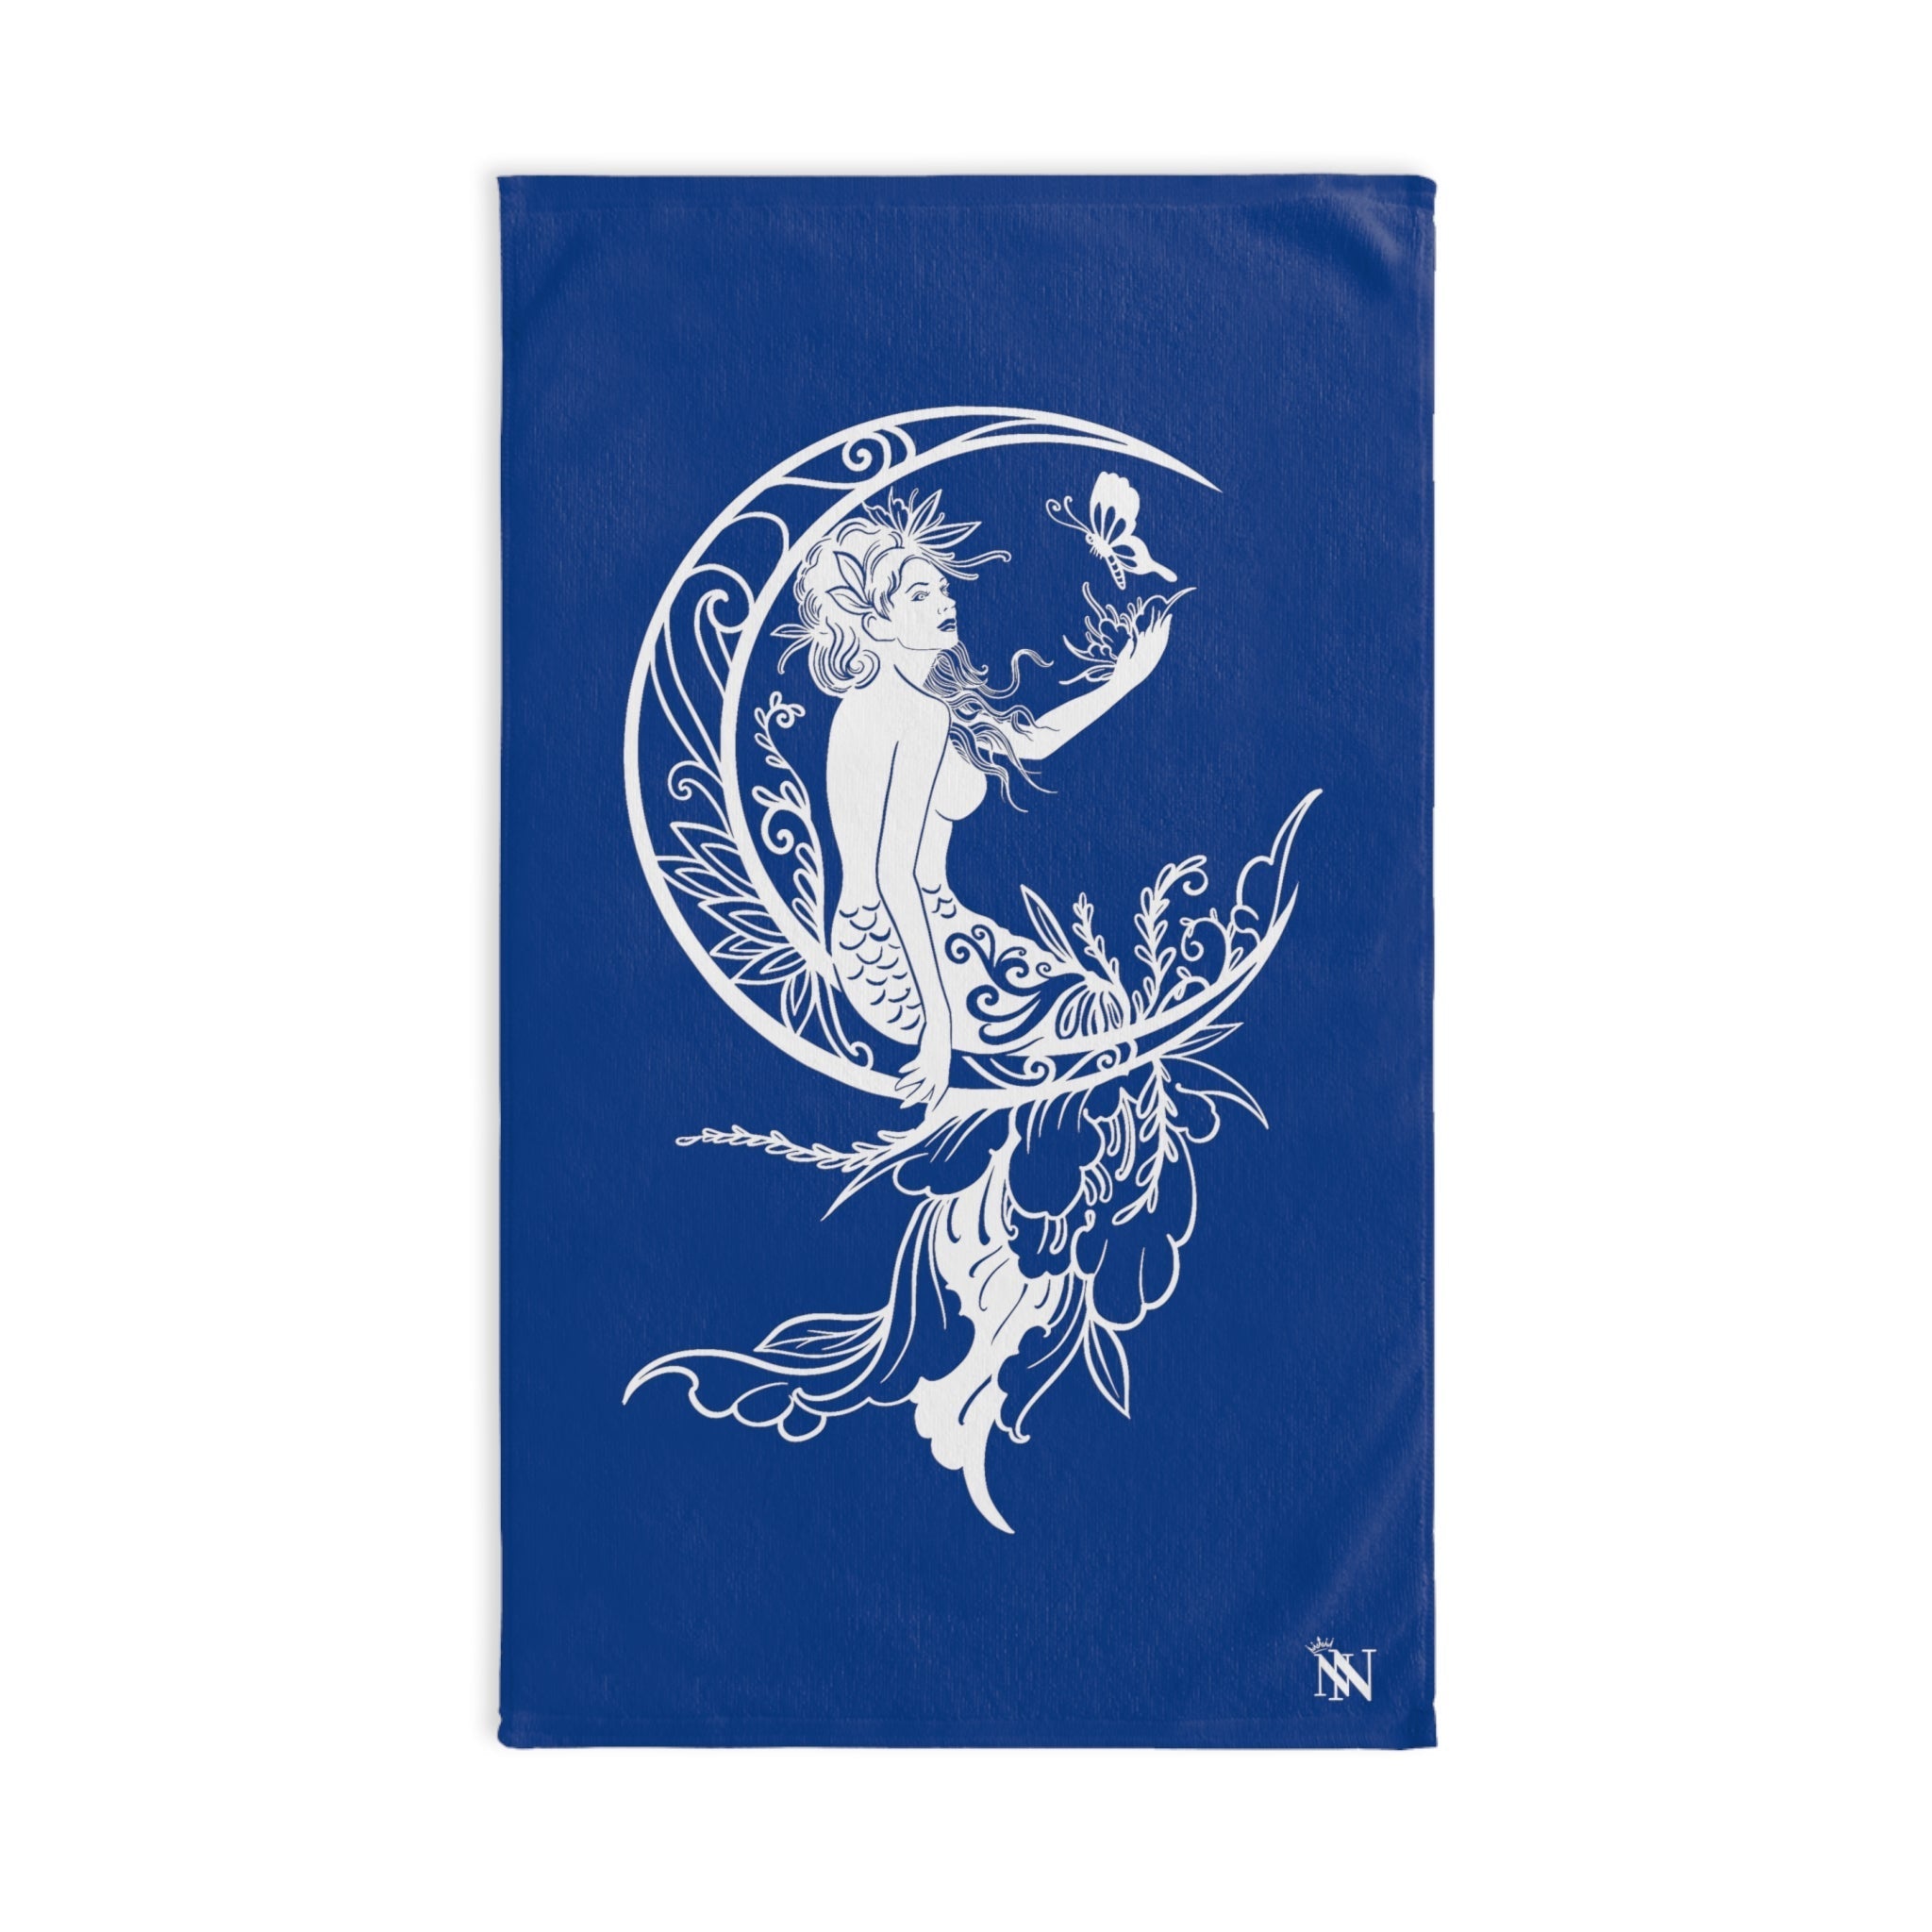 Moon Mermaid Star Blue | Gifts for Boyfriend, Funny Towel Romantic Gift for Wedding Couple Fiance First Year Anniversary Valentines, Party Gag Gifts, Joke Humor Cloth for Husband Men BF NECTAR NAPKINS